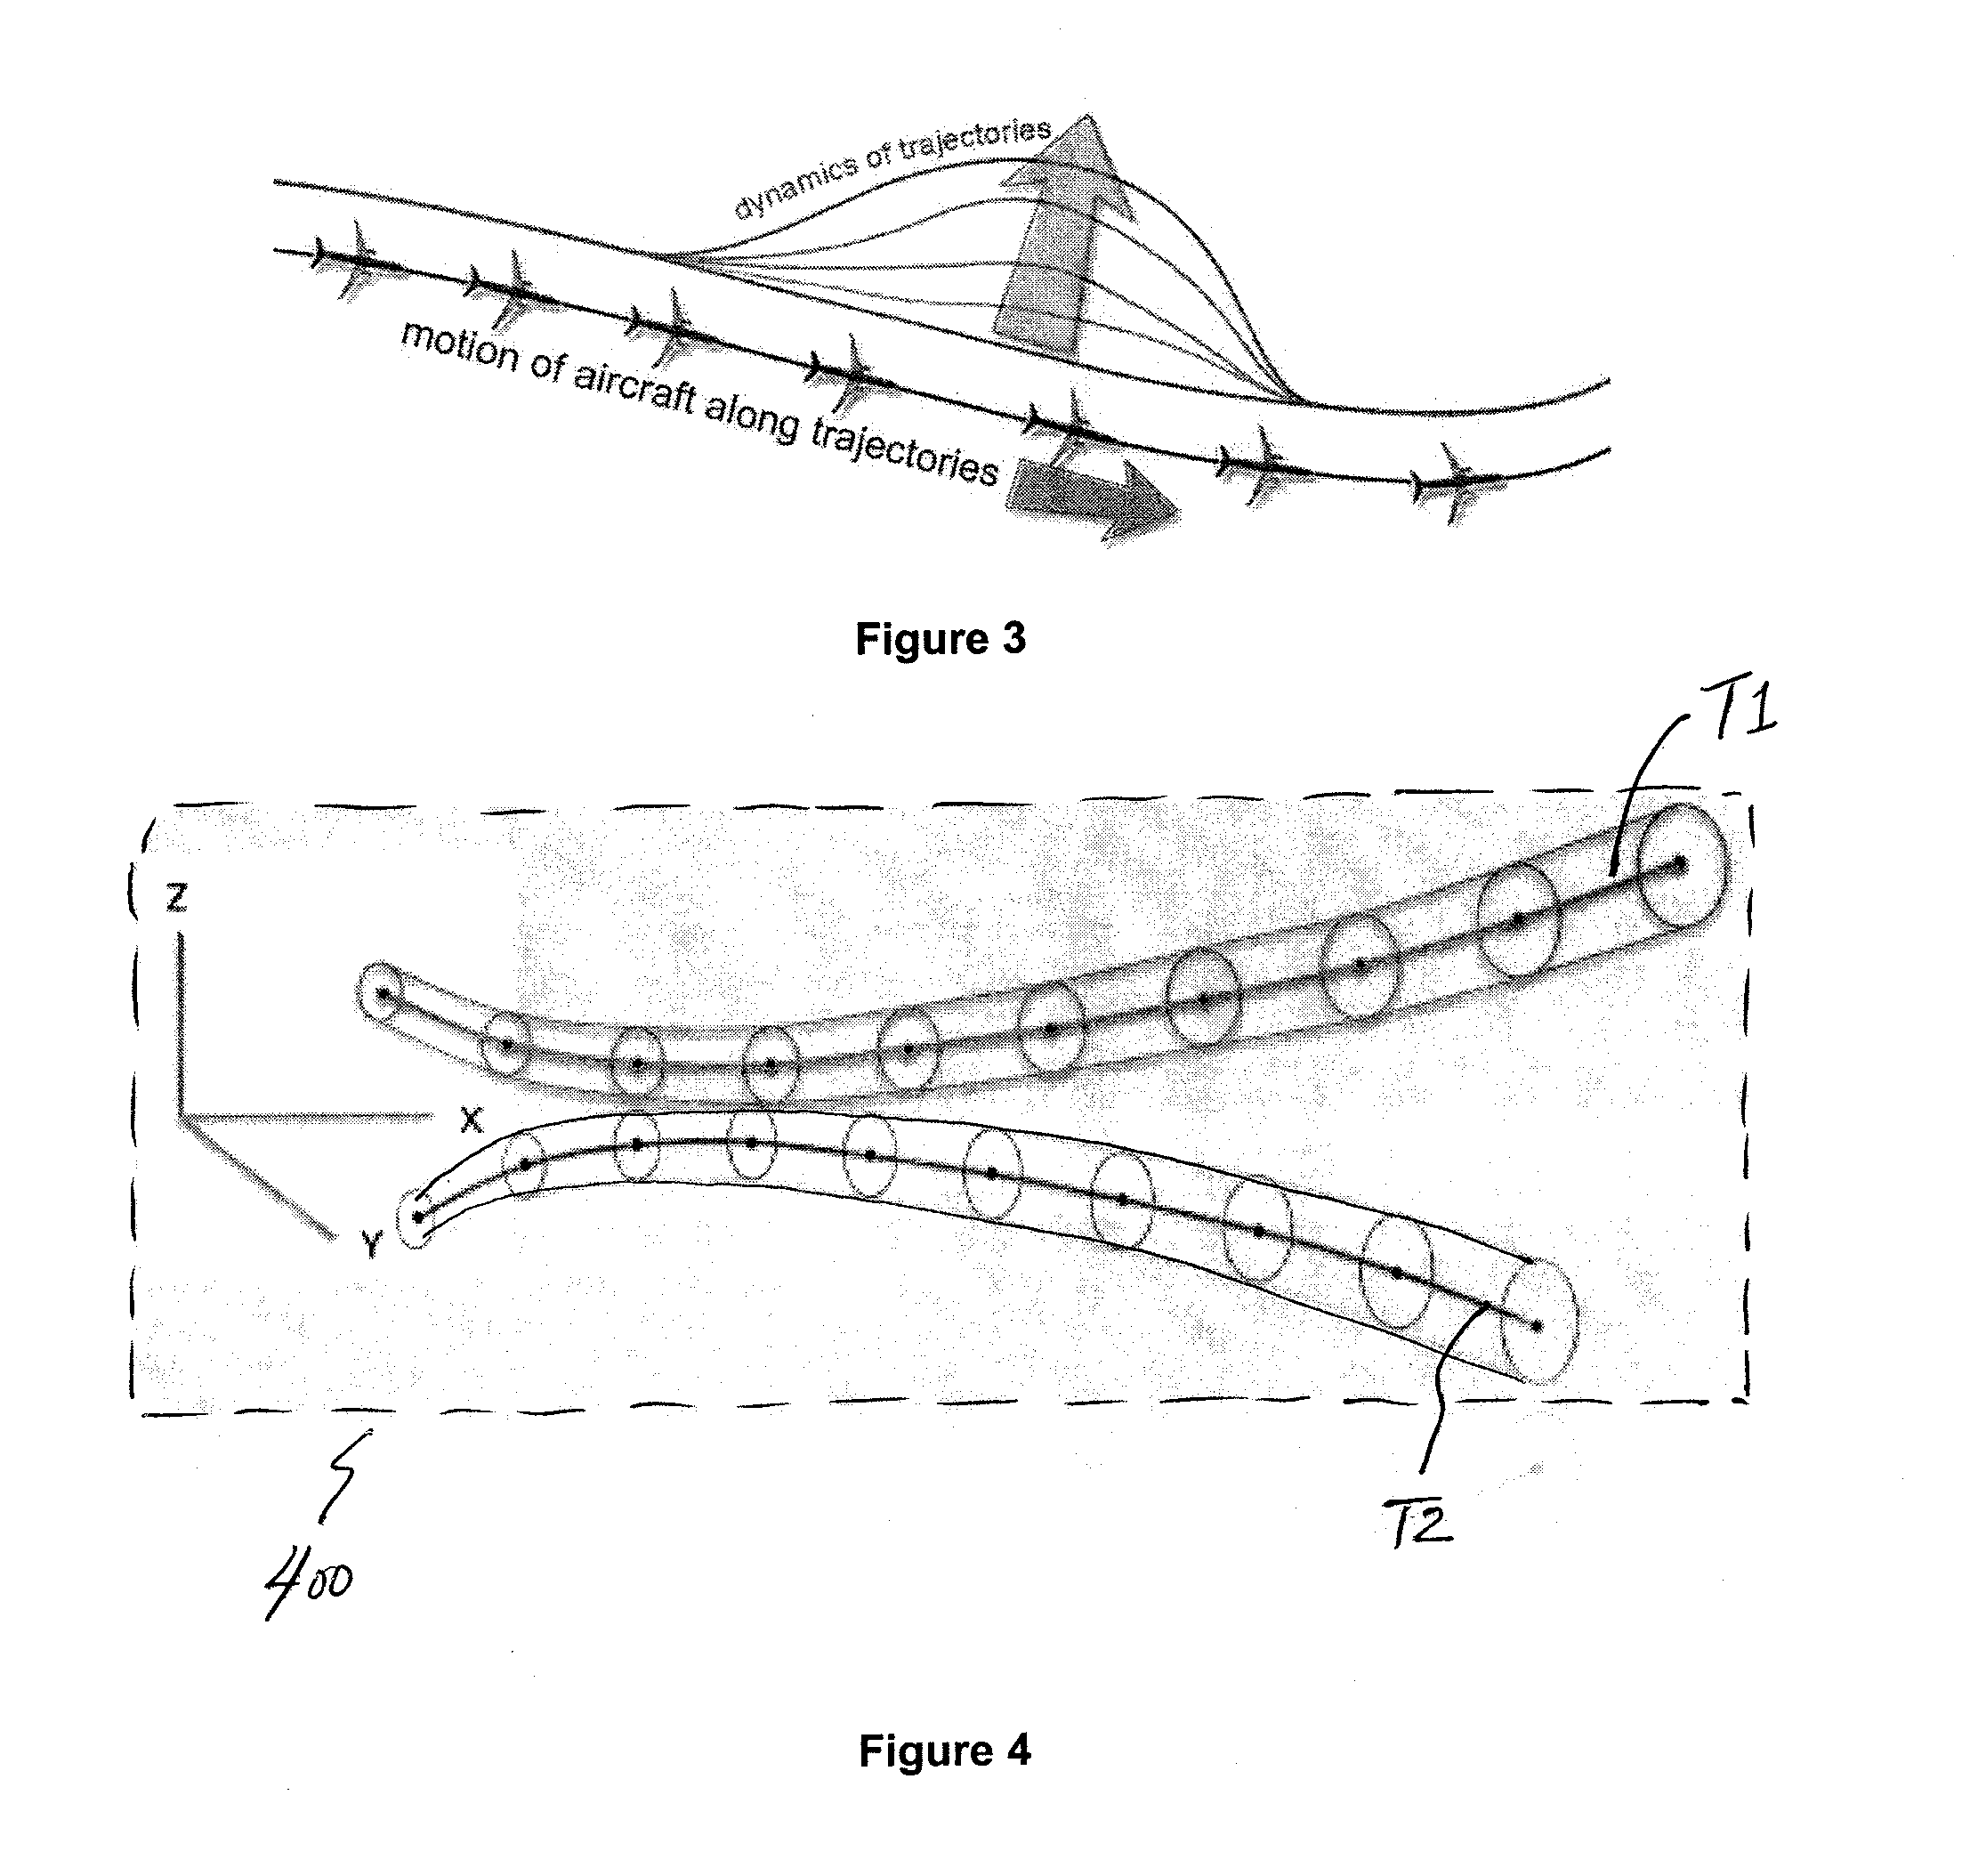 System and Method for Planning, Disruption Management, and Optimization of Networked, Scheduled or On-Demand Air Transport Fleet Trajectory Operations